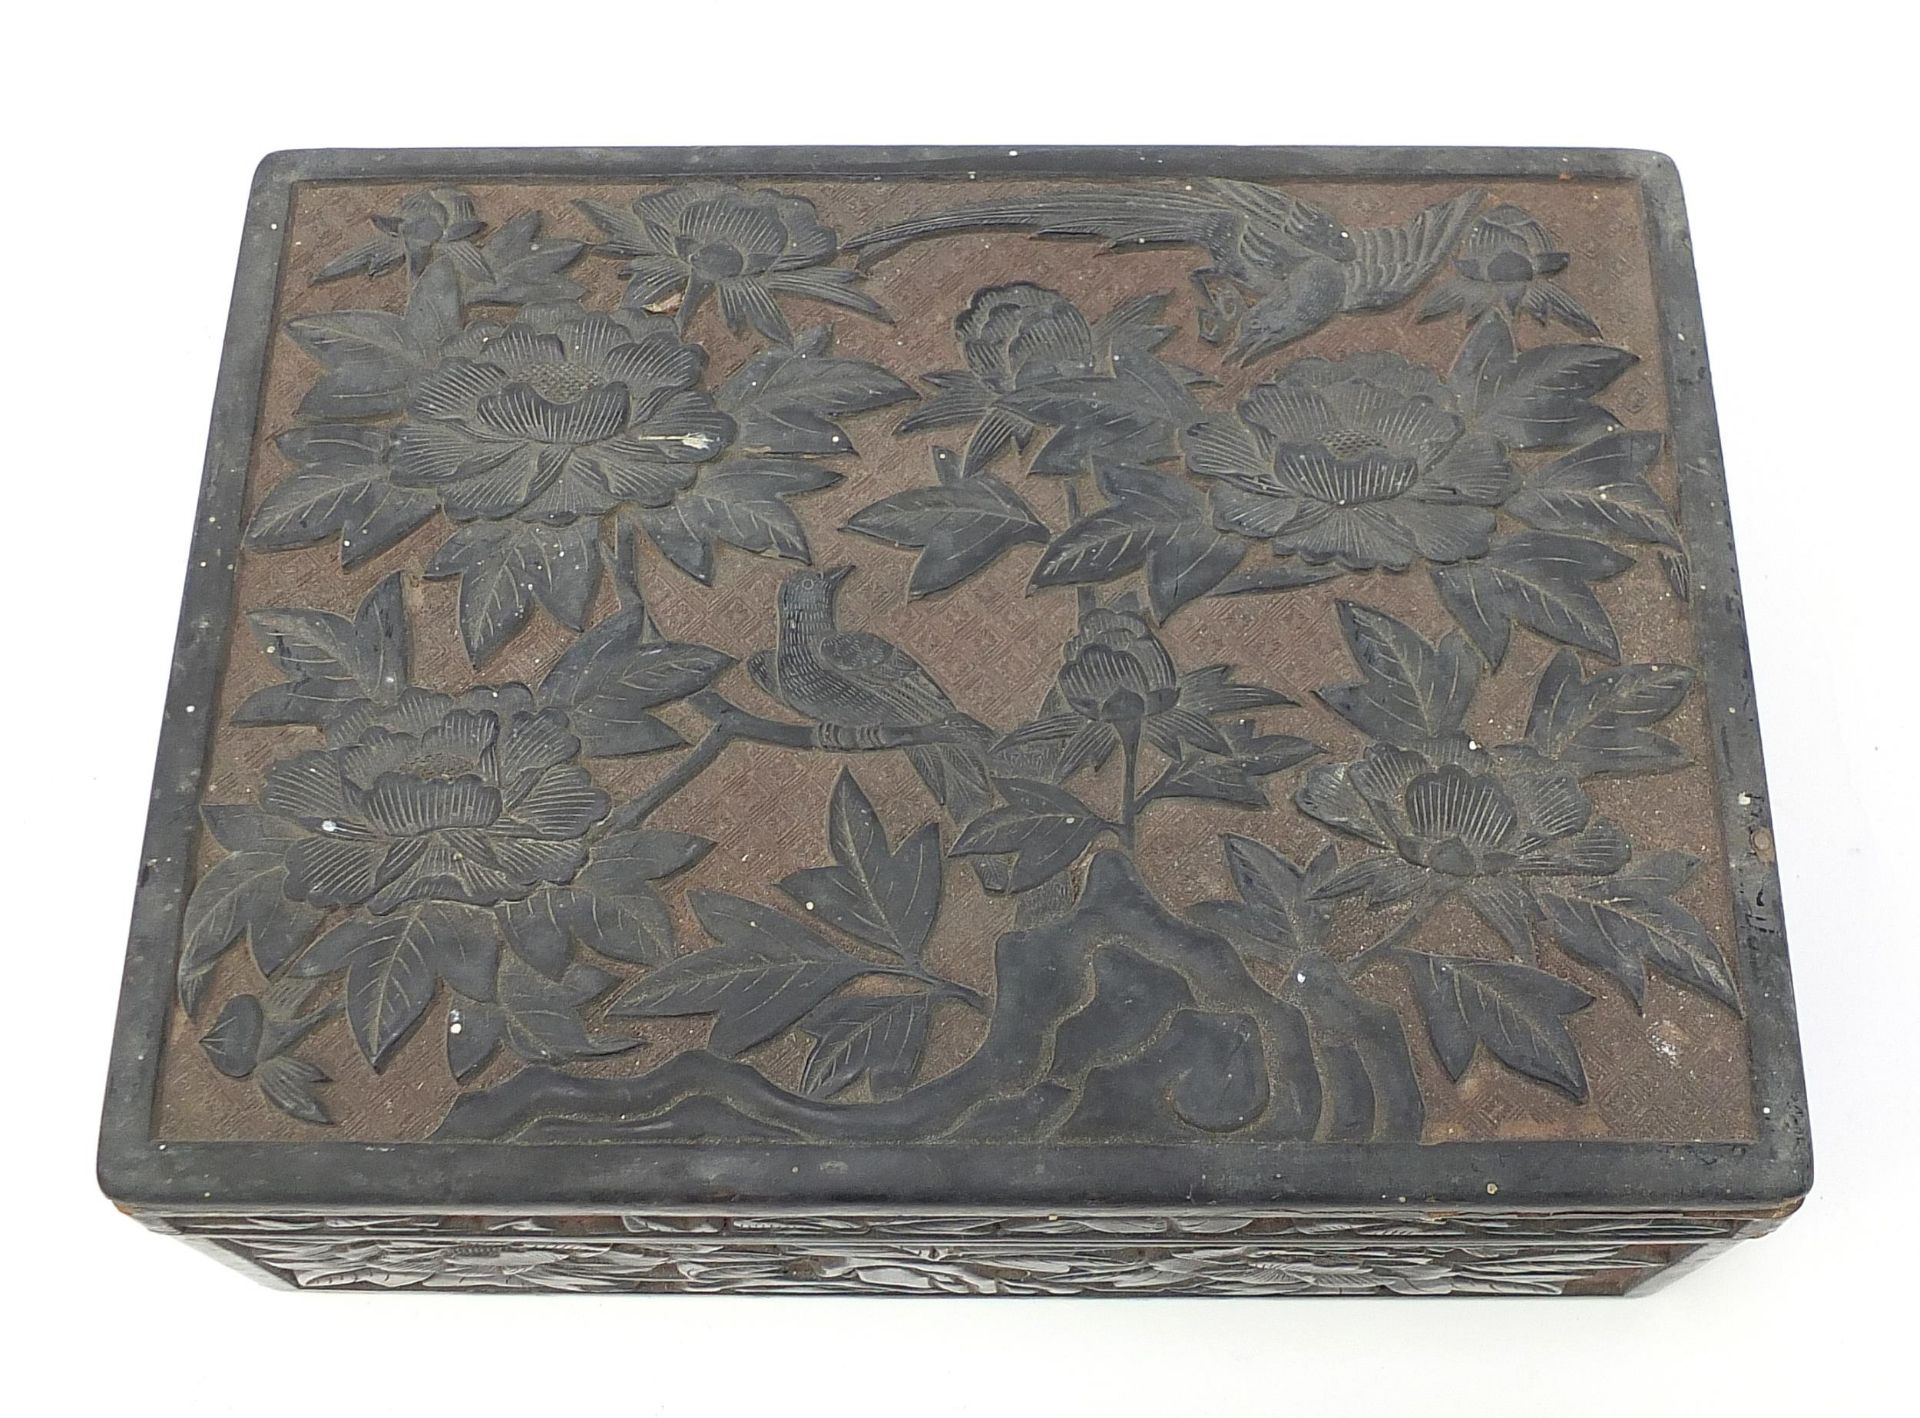 Chinese cinnabar lacquer box and cover carved with birds amongst flowers, 10.5cm H x 29cm W x 21.5cm - Image 3 of 8